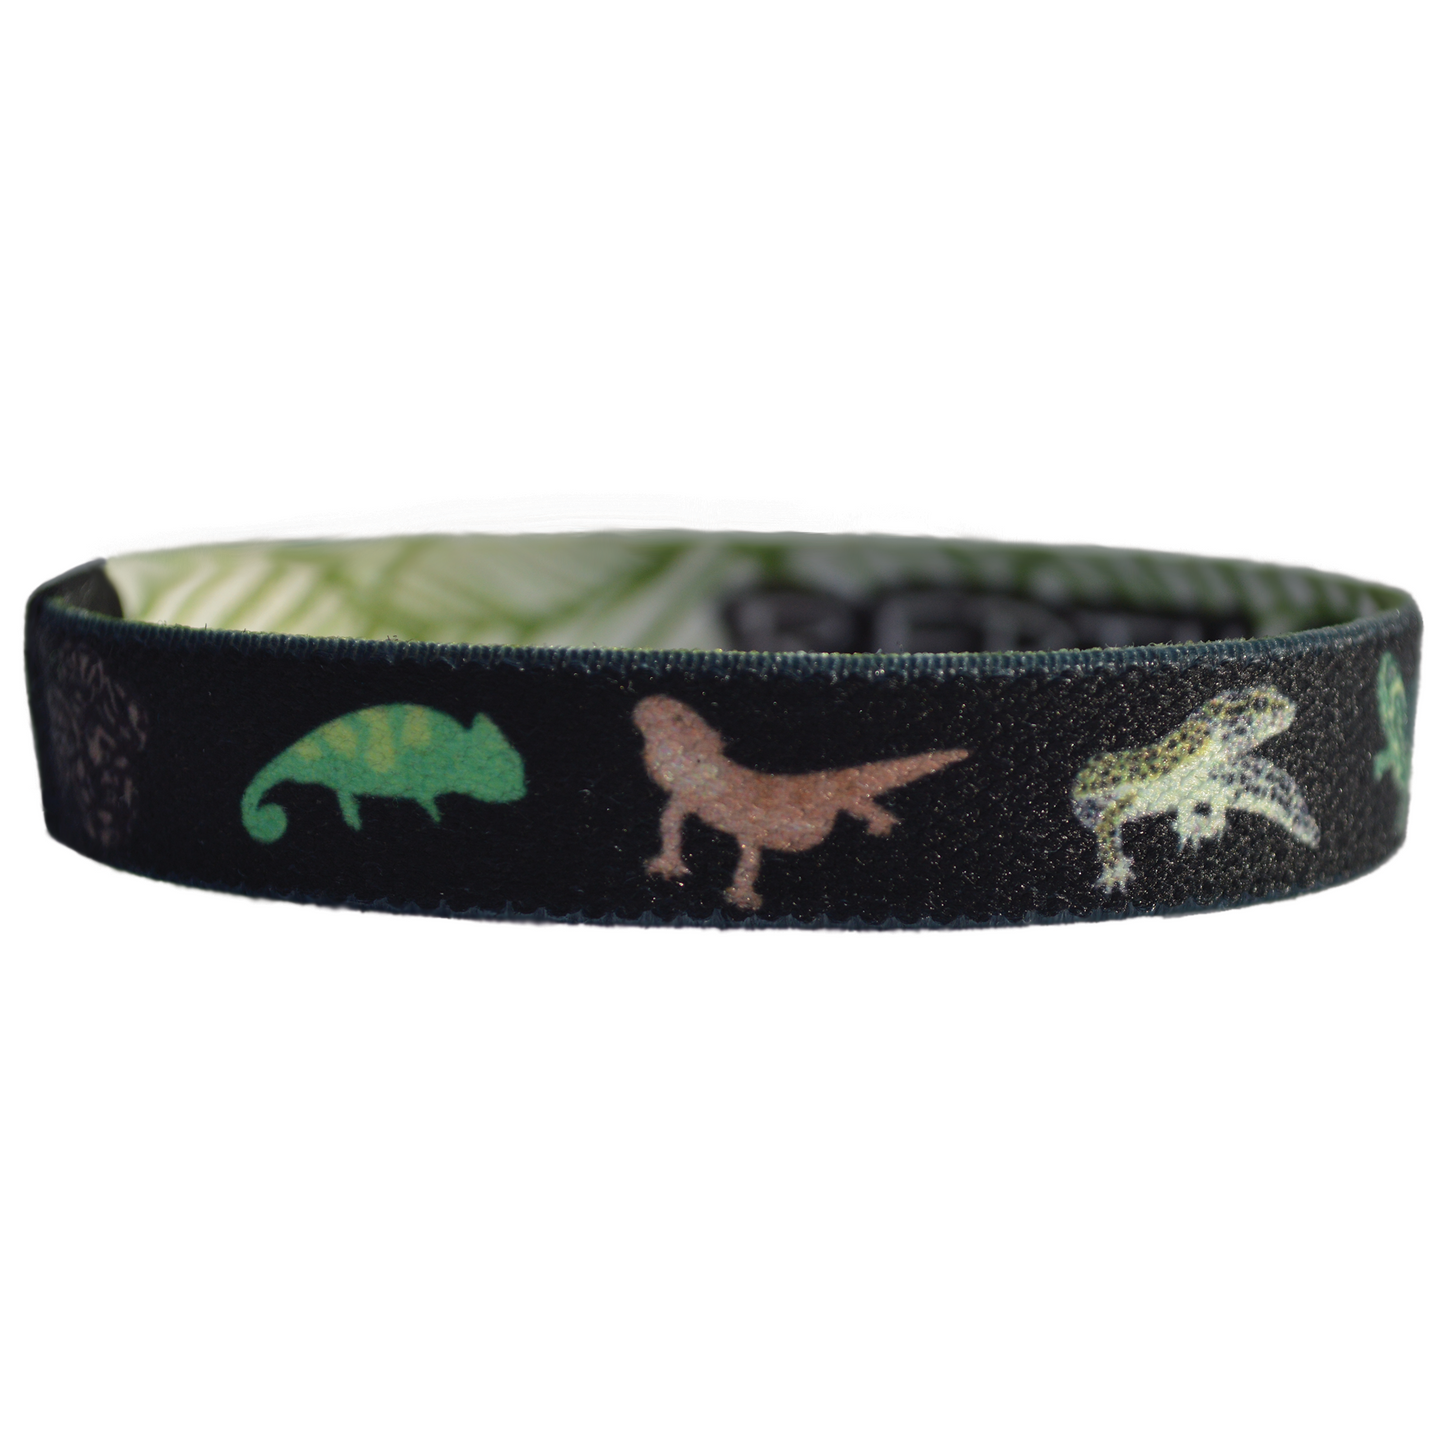 Bracelet for reptile keepers and reptile lovers by tank life apparel. wristband with chameleon, bearded dragon, leopard gecko, ball python snake, yellow bellied turtle.